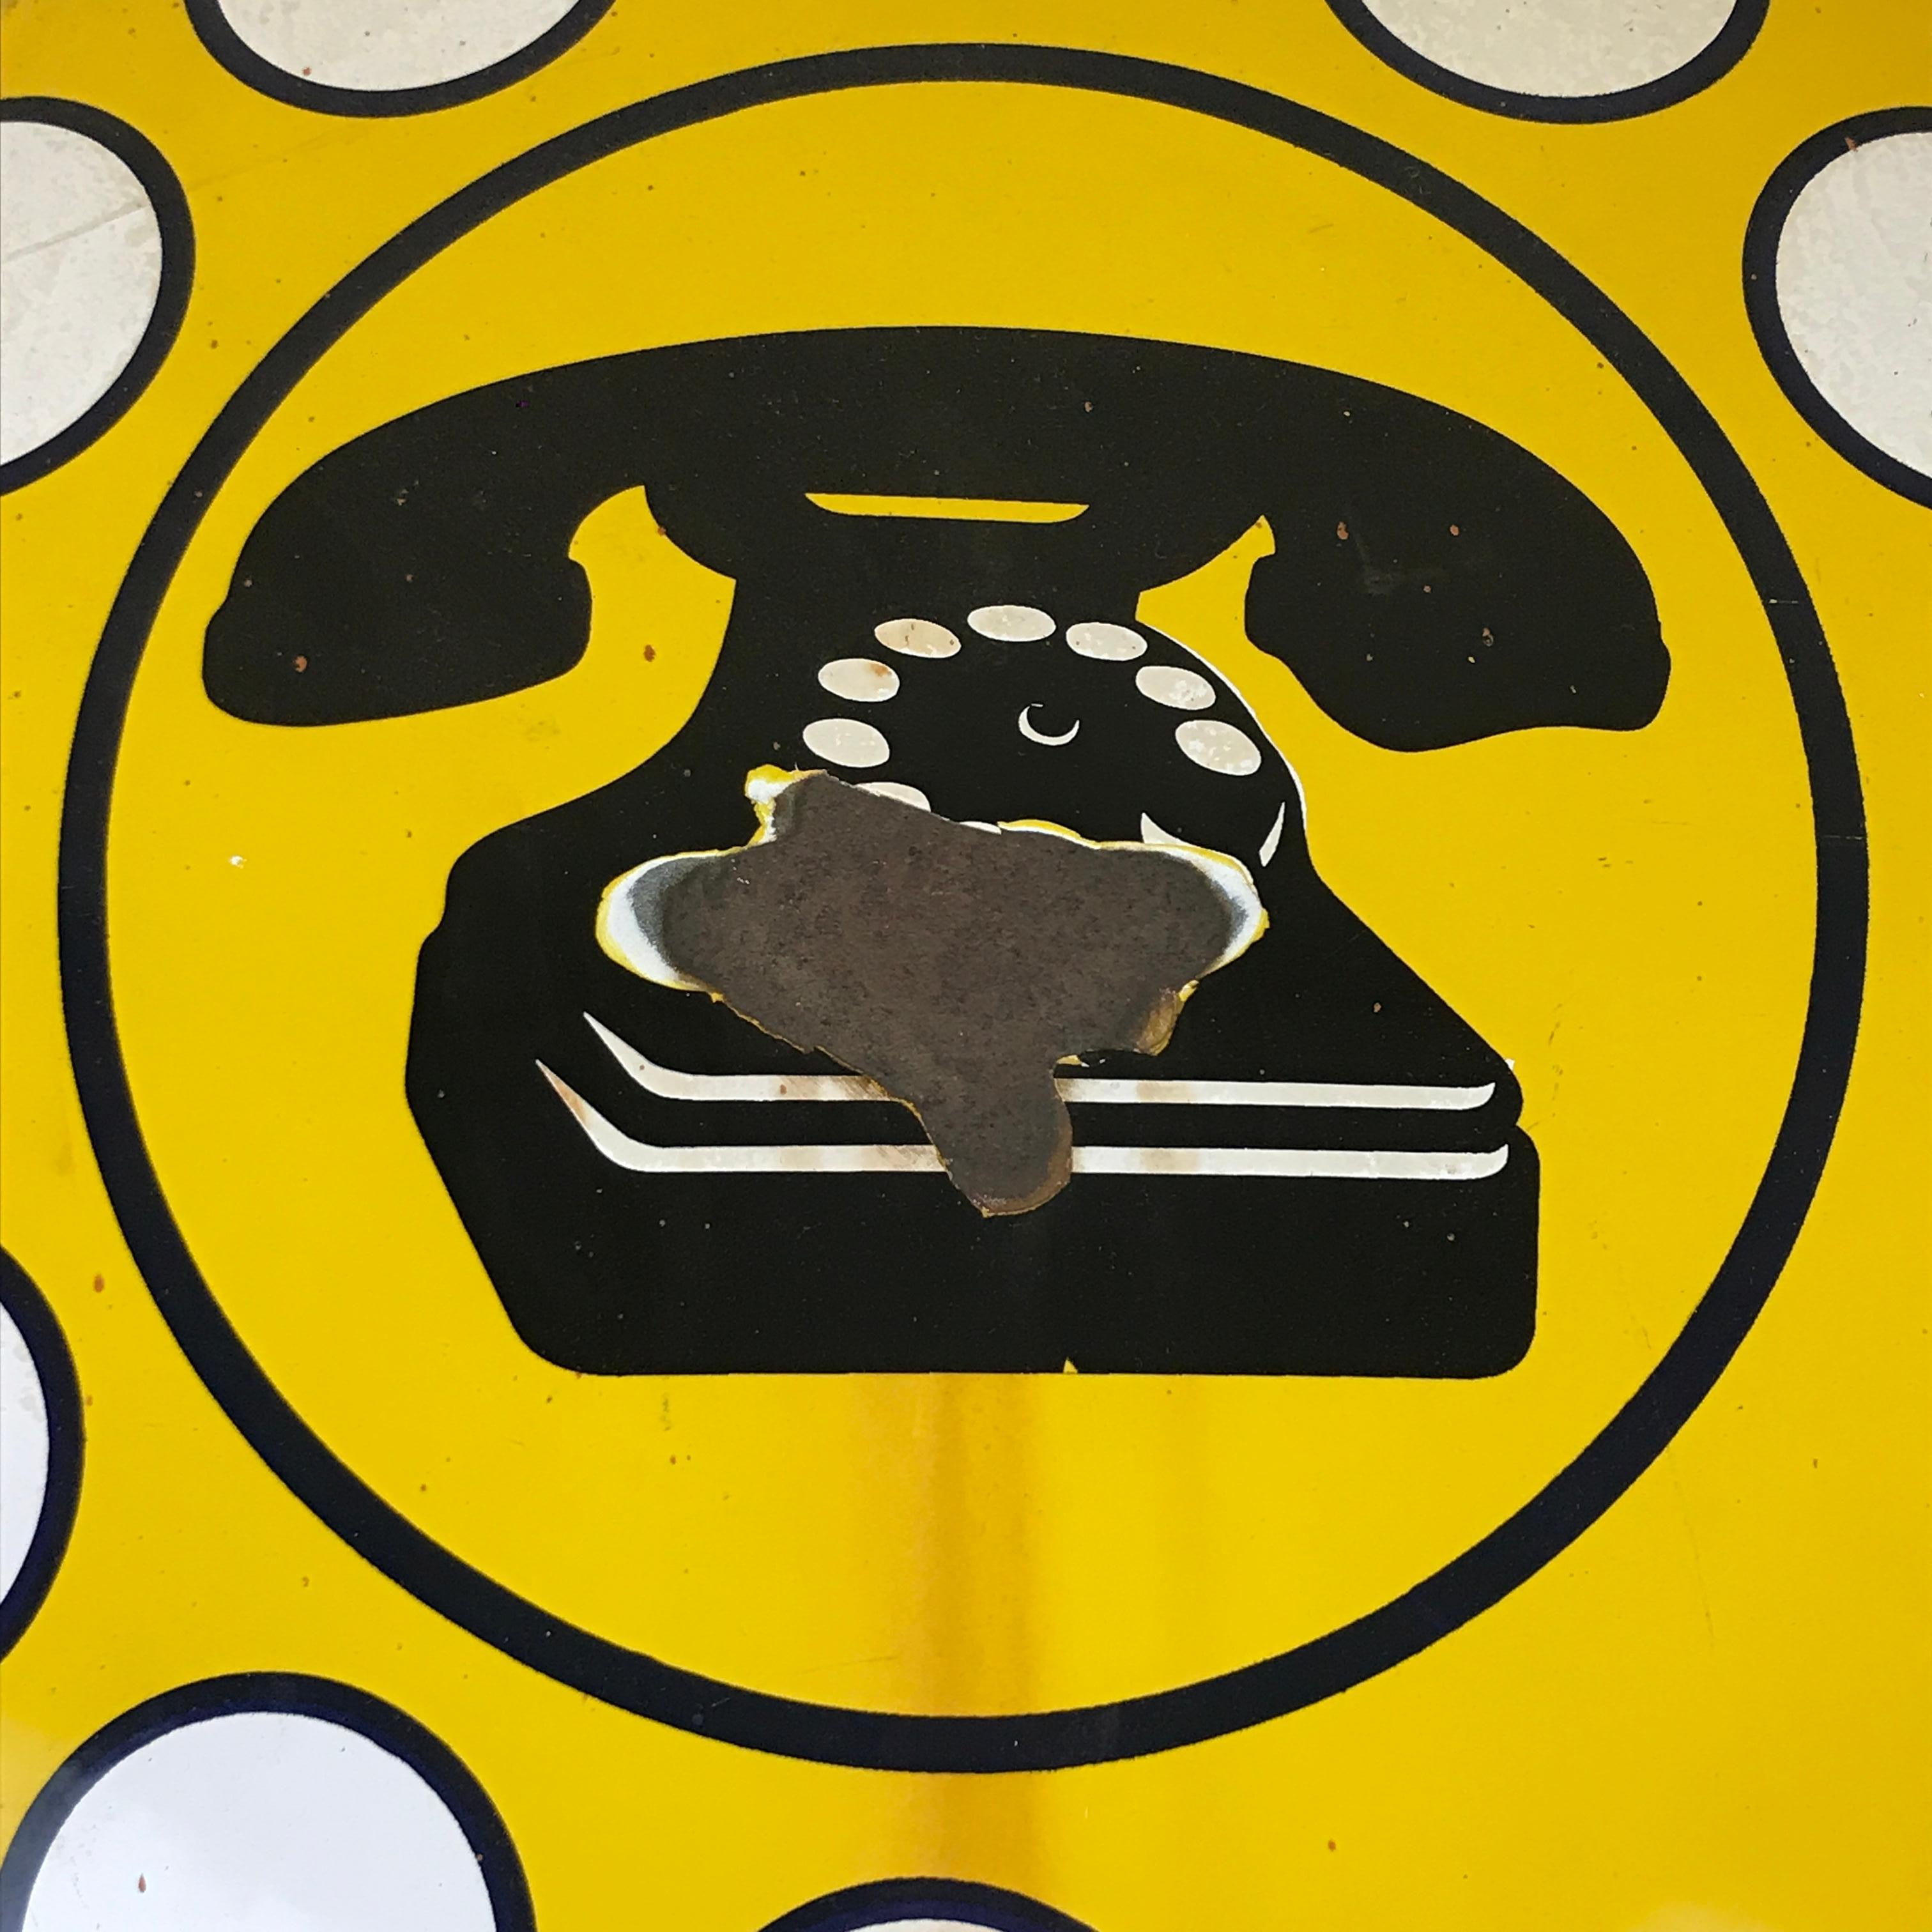 1970s Yellow Curved Enamel Metal Vintage Italian Telephone Sign, Sip For Sale 1